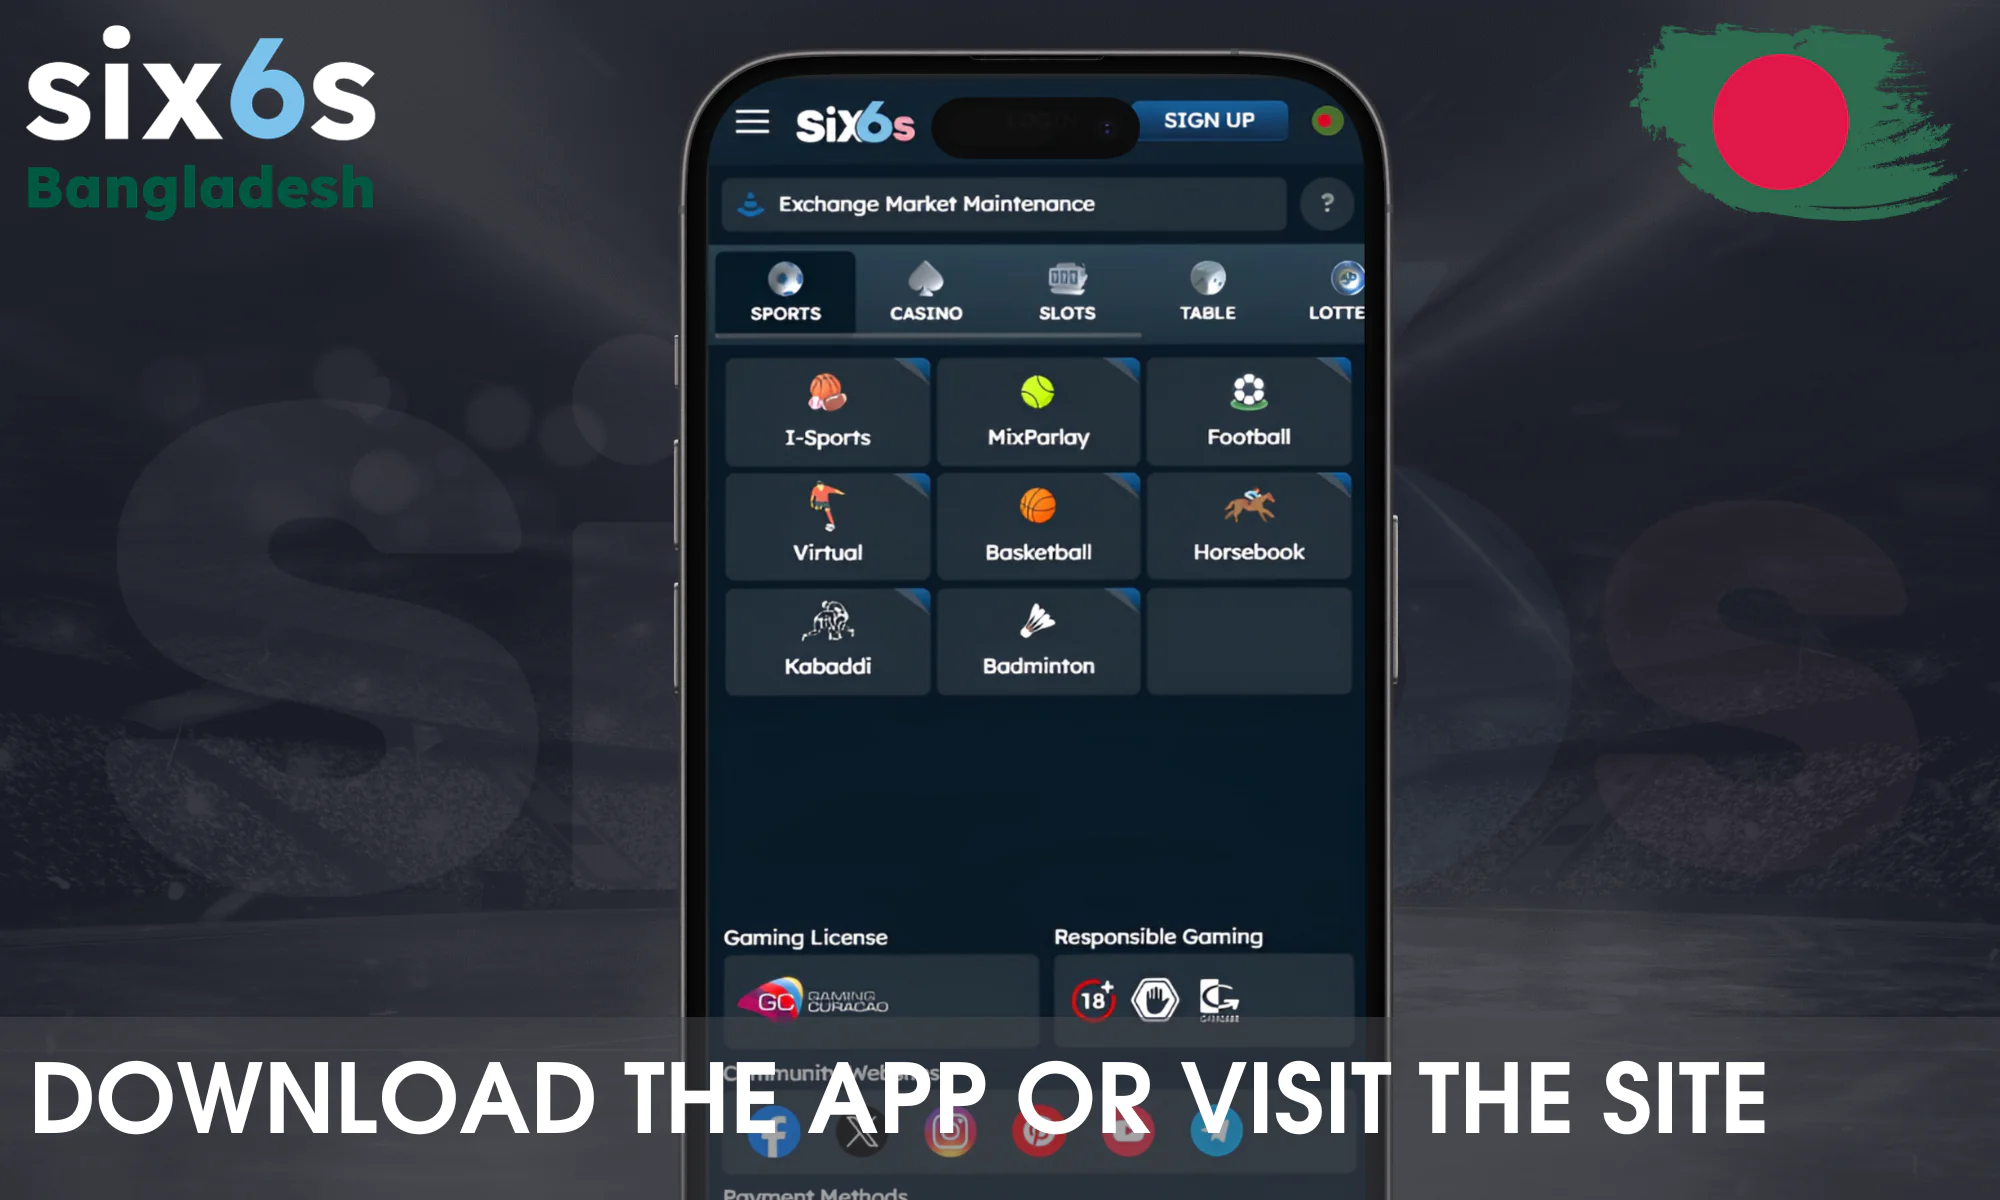 Find the Six6s website or download the app